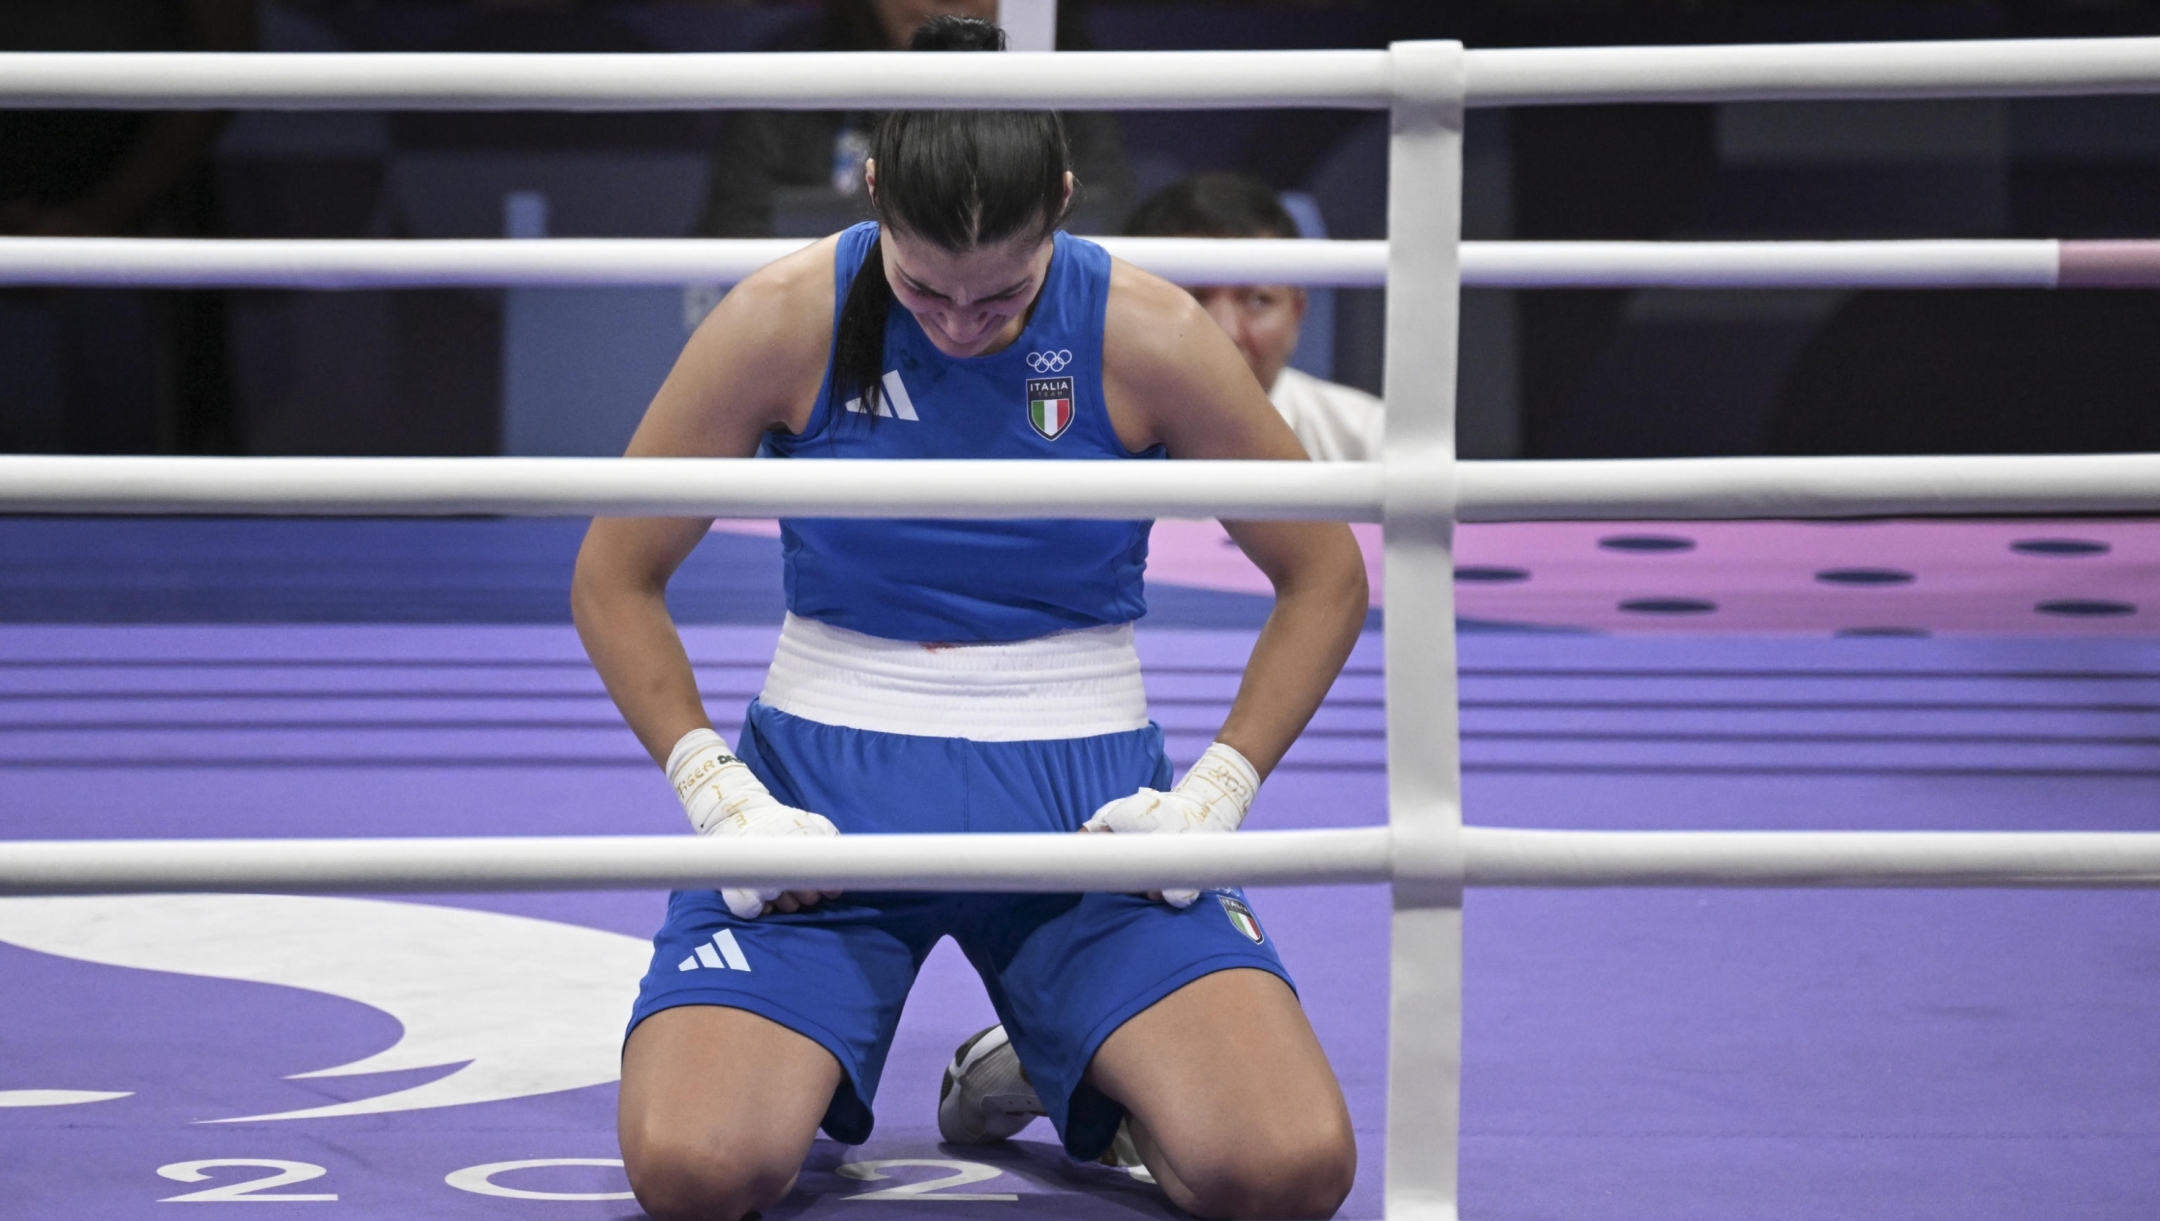 Angela Carini  of Italy during women's 66kg preliminar round of 16 bout of the Boxing competitions in the Paris 2024 Olympic Games, at the North Paris Arena in Villepinte, France,  1 August 2024 . ANSA / CIRO FUSCO